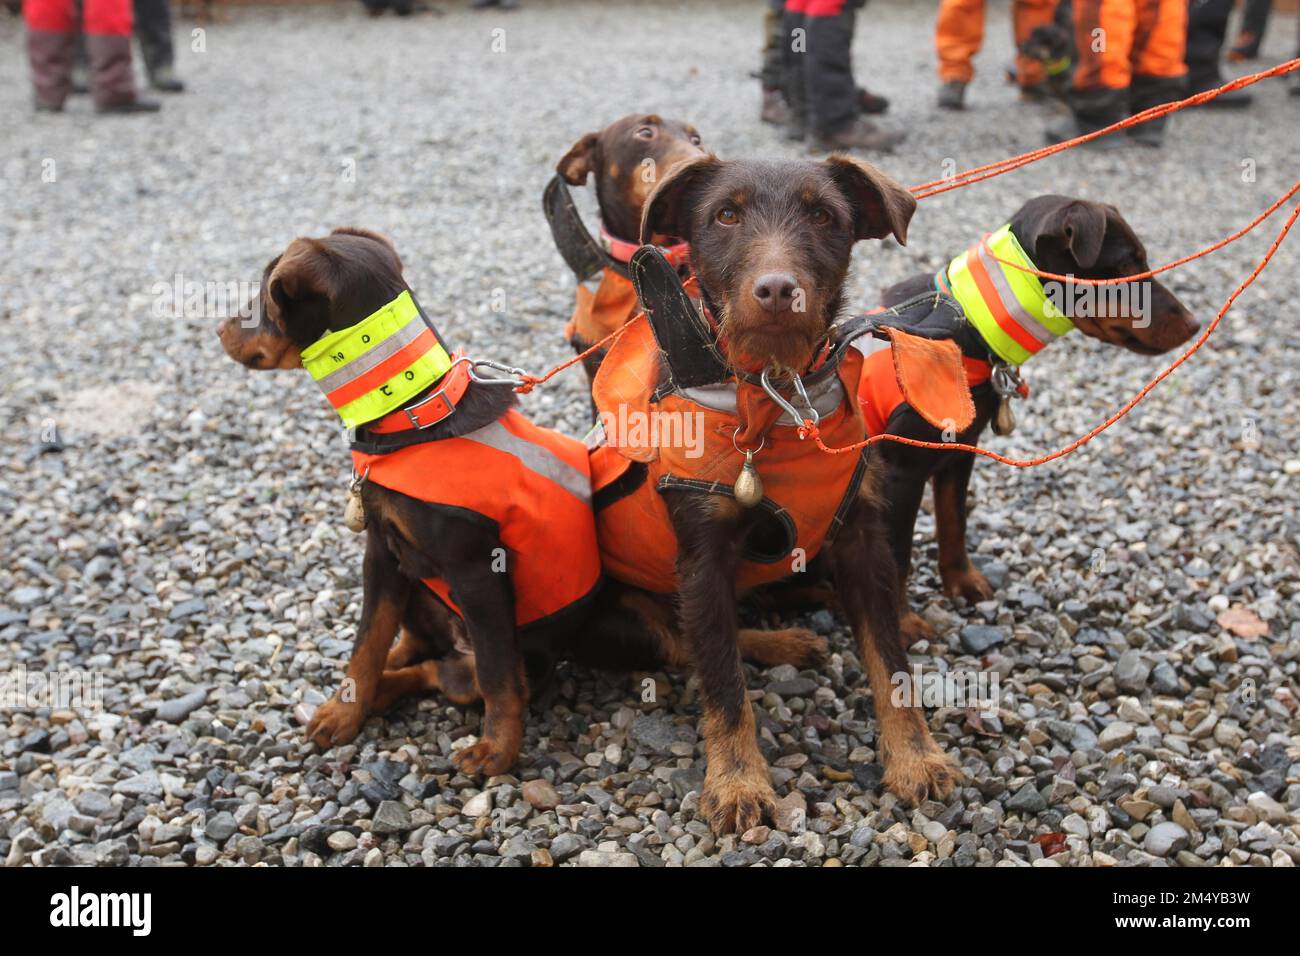 Hunting dogs, hunting terriers in protective waistcoats in front of a sow hunt, Allgaeu, Bavaria, Germany Stock Photo